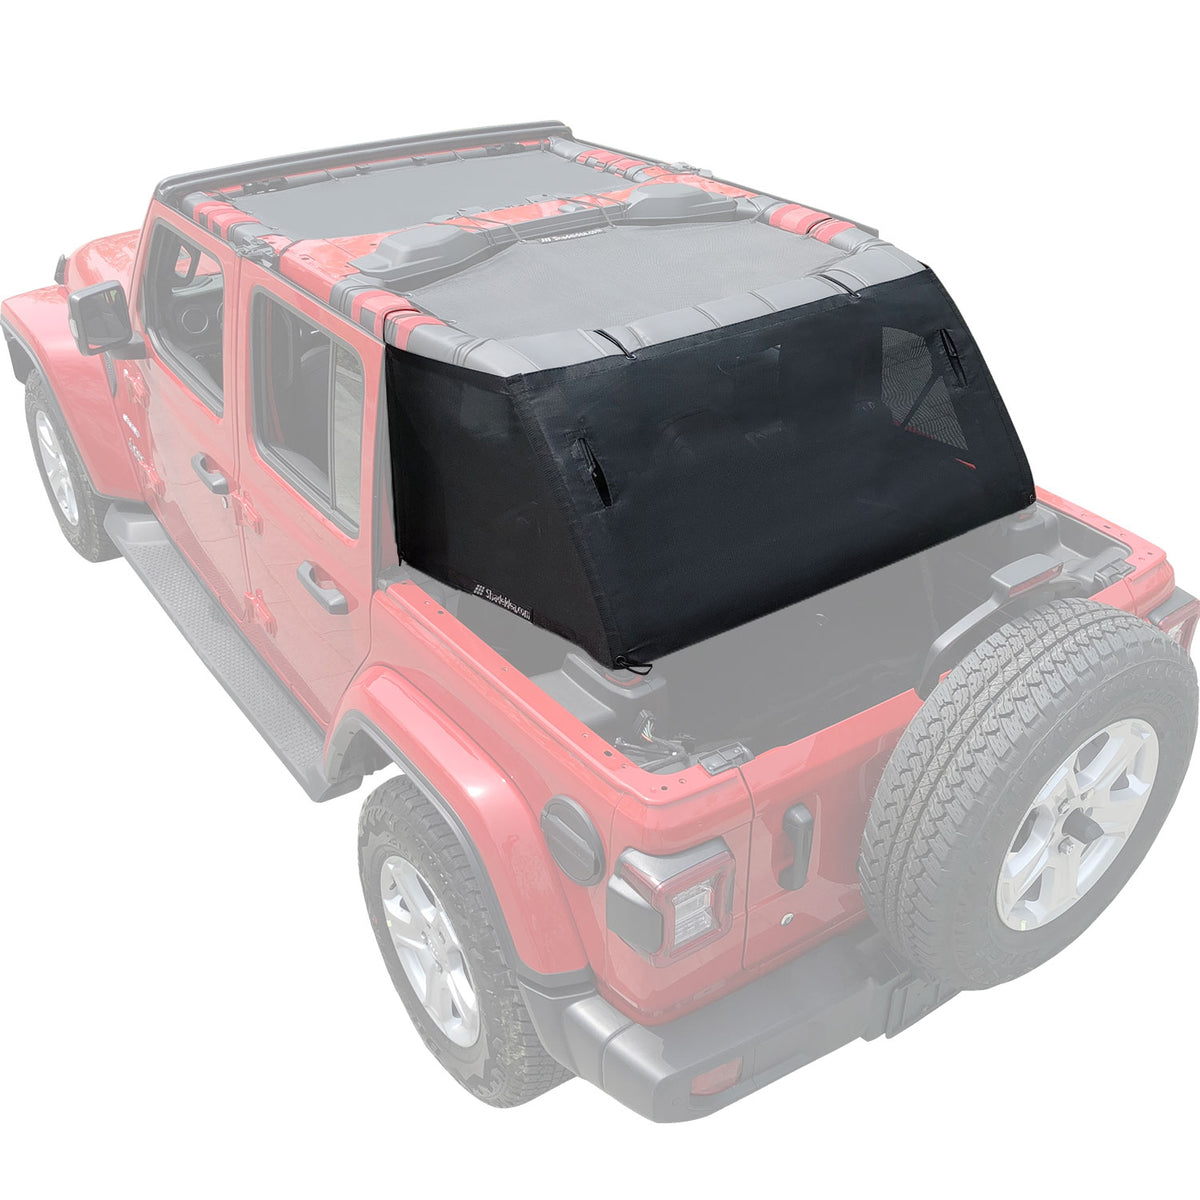 Shadeidea Jeep Wrangler JL Sun Shade JLU Door Sunshade Mesh Screen Trunk  Cage Cover Unlimited (2018-Current) New Model Robicon Sahara Sport S  Includes Pouch Grab Bag-10 Years Warranty